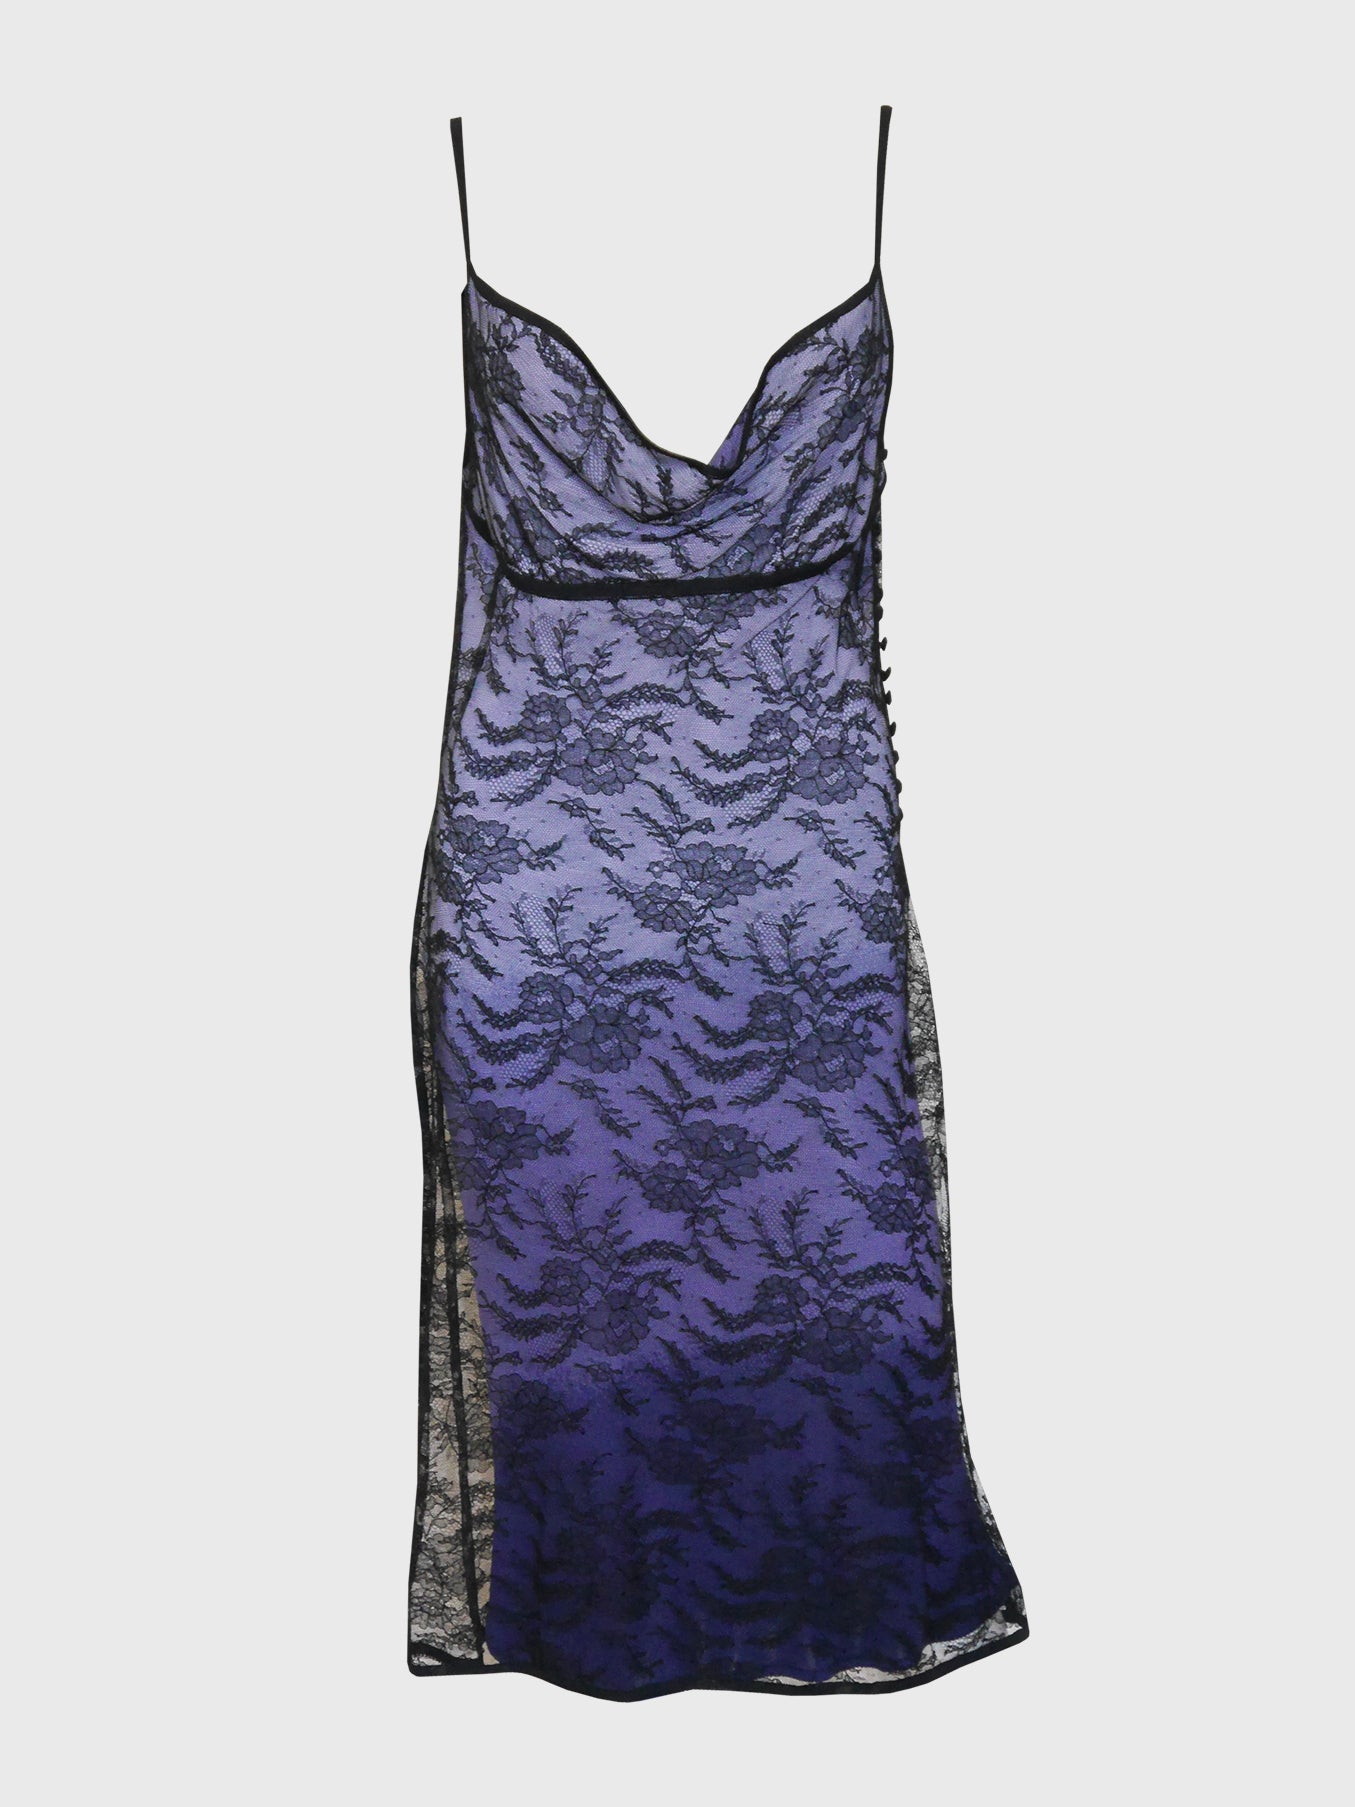 JOHN GALLIANO Fall 1998 Vintage Backless Ombré Lace Evening Dress Size M